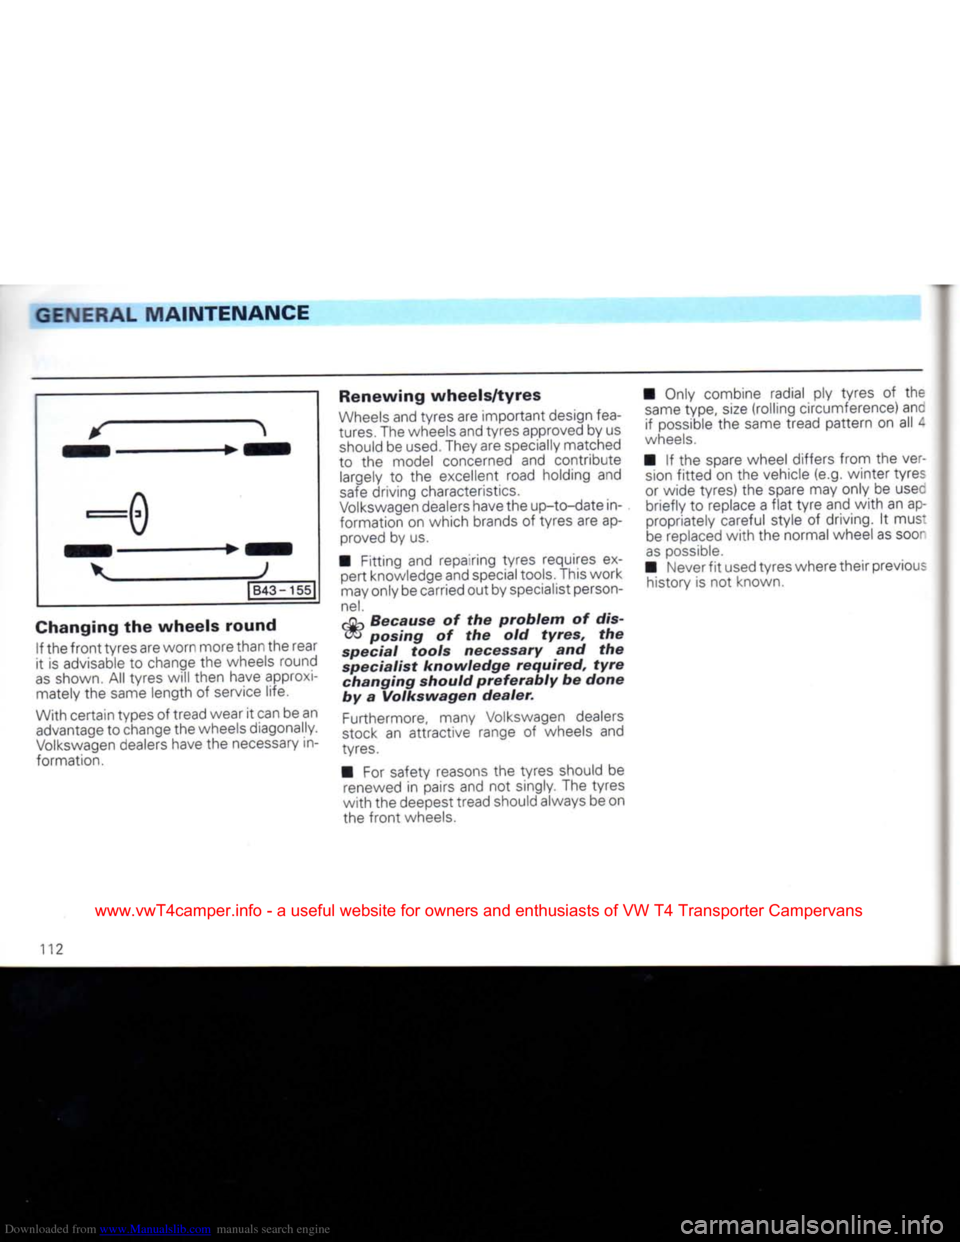 VOLKSWAGEN CARAVELLE 1992 T4 / 4.G Owners Manual Downloaded from www.Manualslib.com manuals search engine 
GENERAL
 MAINTENANCE 
*
 ^ 

v
 J 
 l B43
 -
 155~| 

Changing
 the wheels round  If
 the
 front
 tyres are worn more than the rear 
it
 is
 a